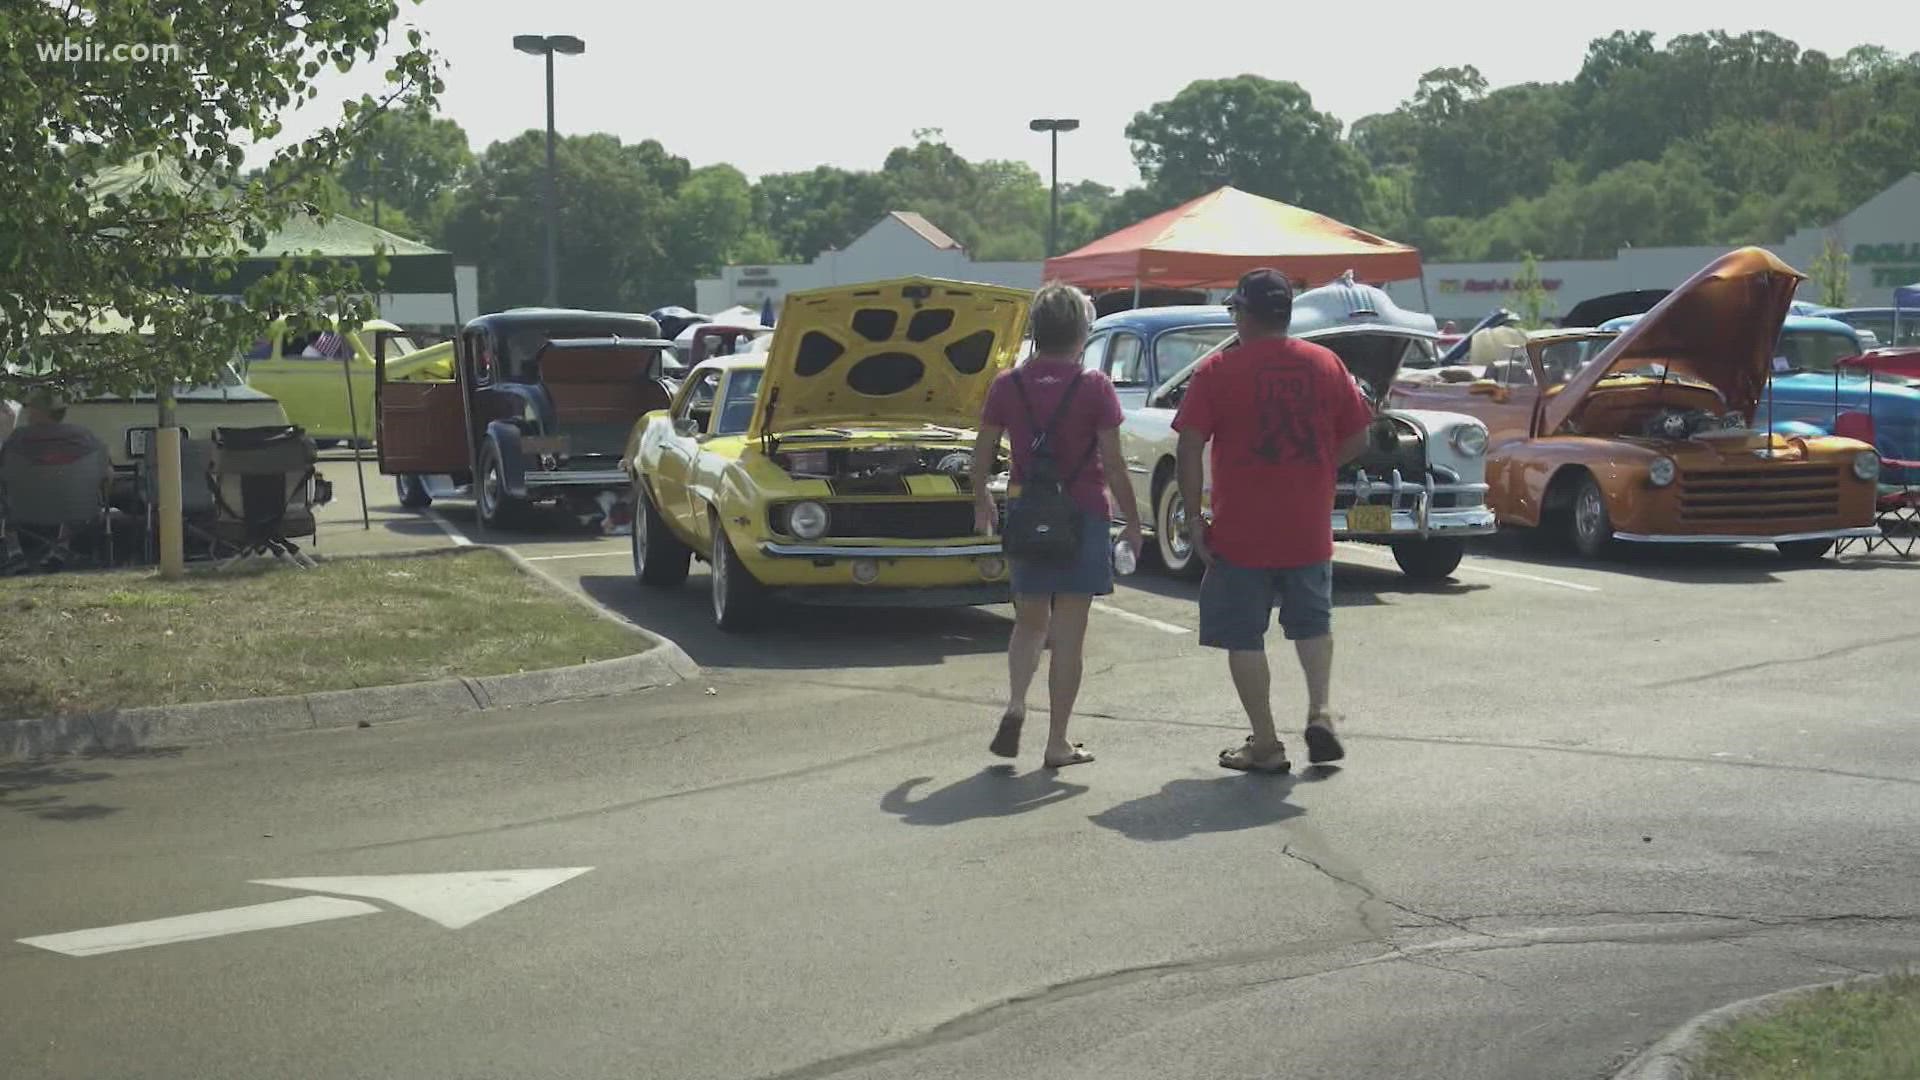 People on Clinton Highway had the chance to see vintage cars and support families in need during the Cruisin' for Kids event.